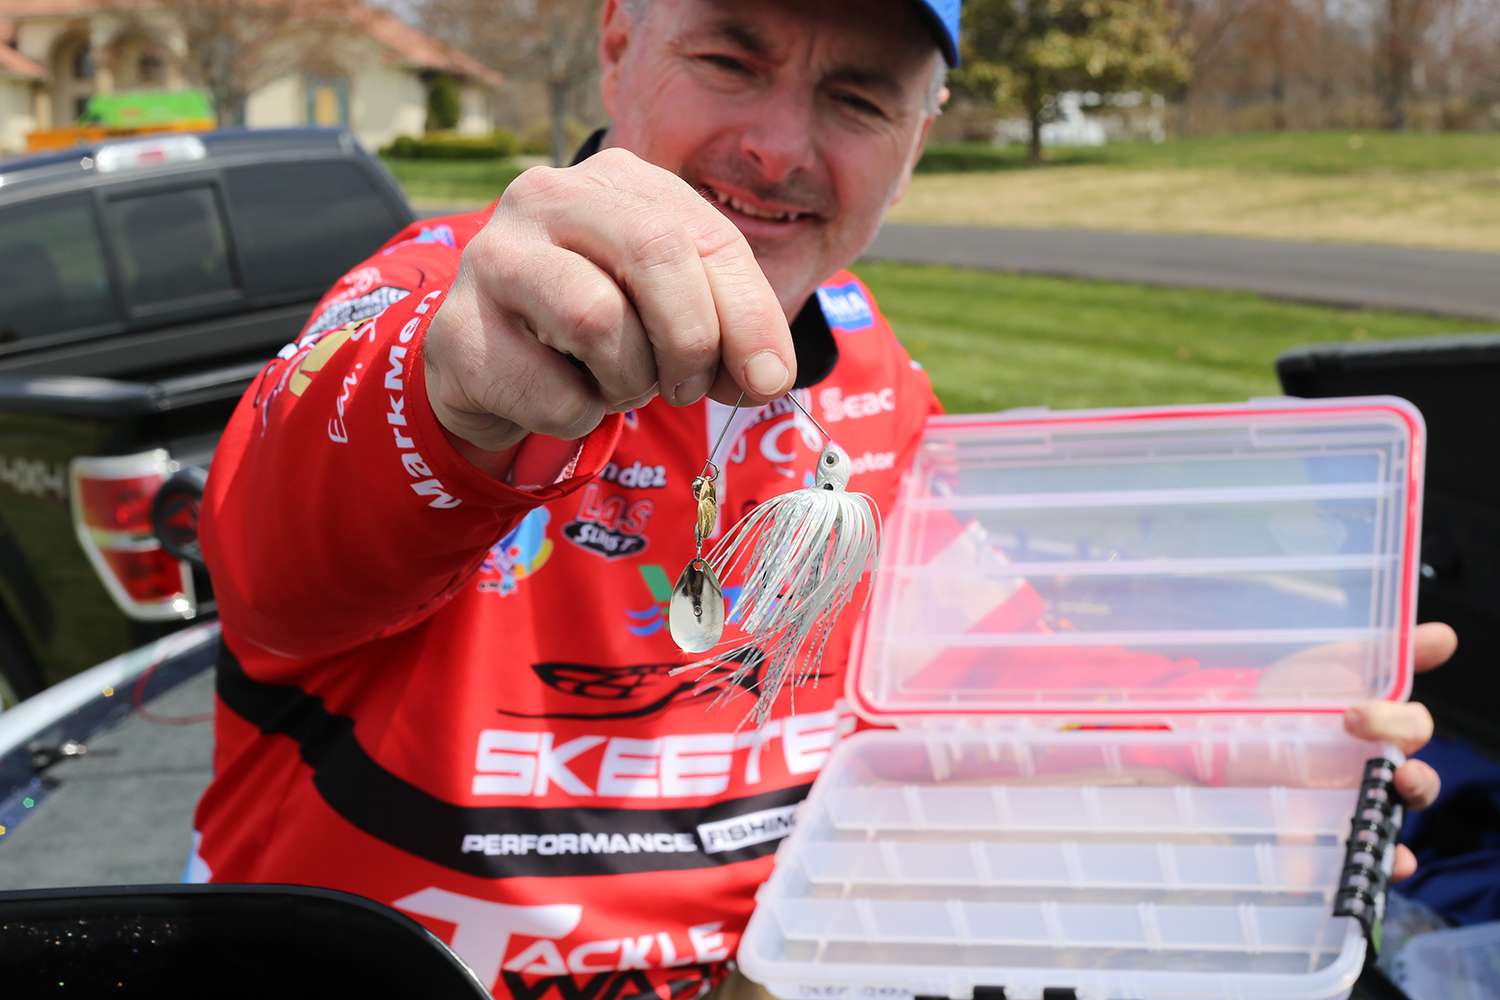 A spinnerbait shouldn't be surprise. Most consider Menendez the best spinnerbait angler alive. 